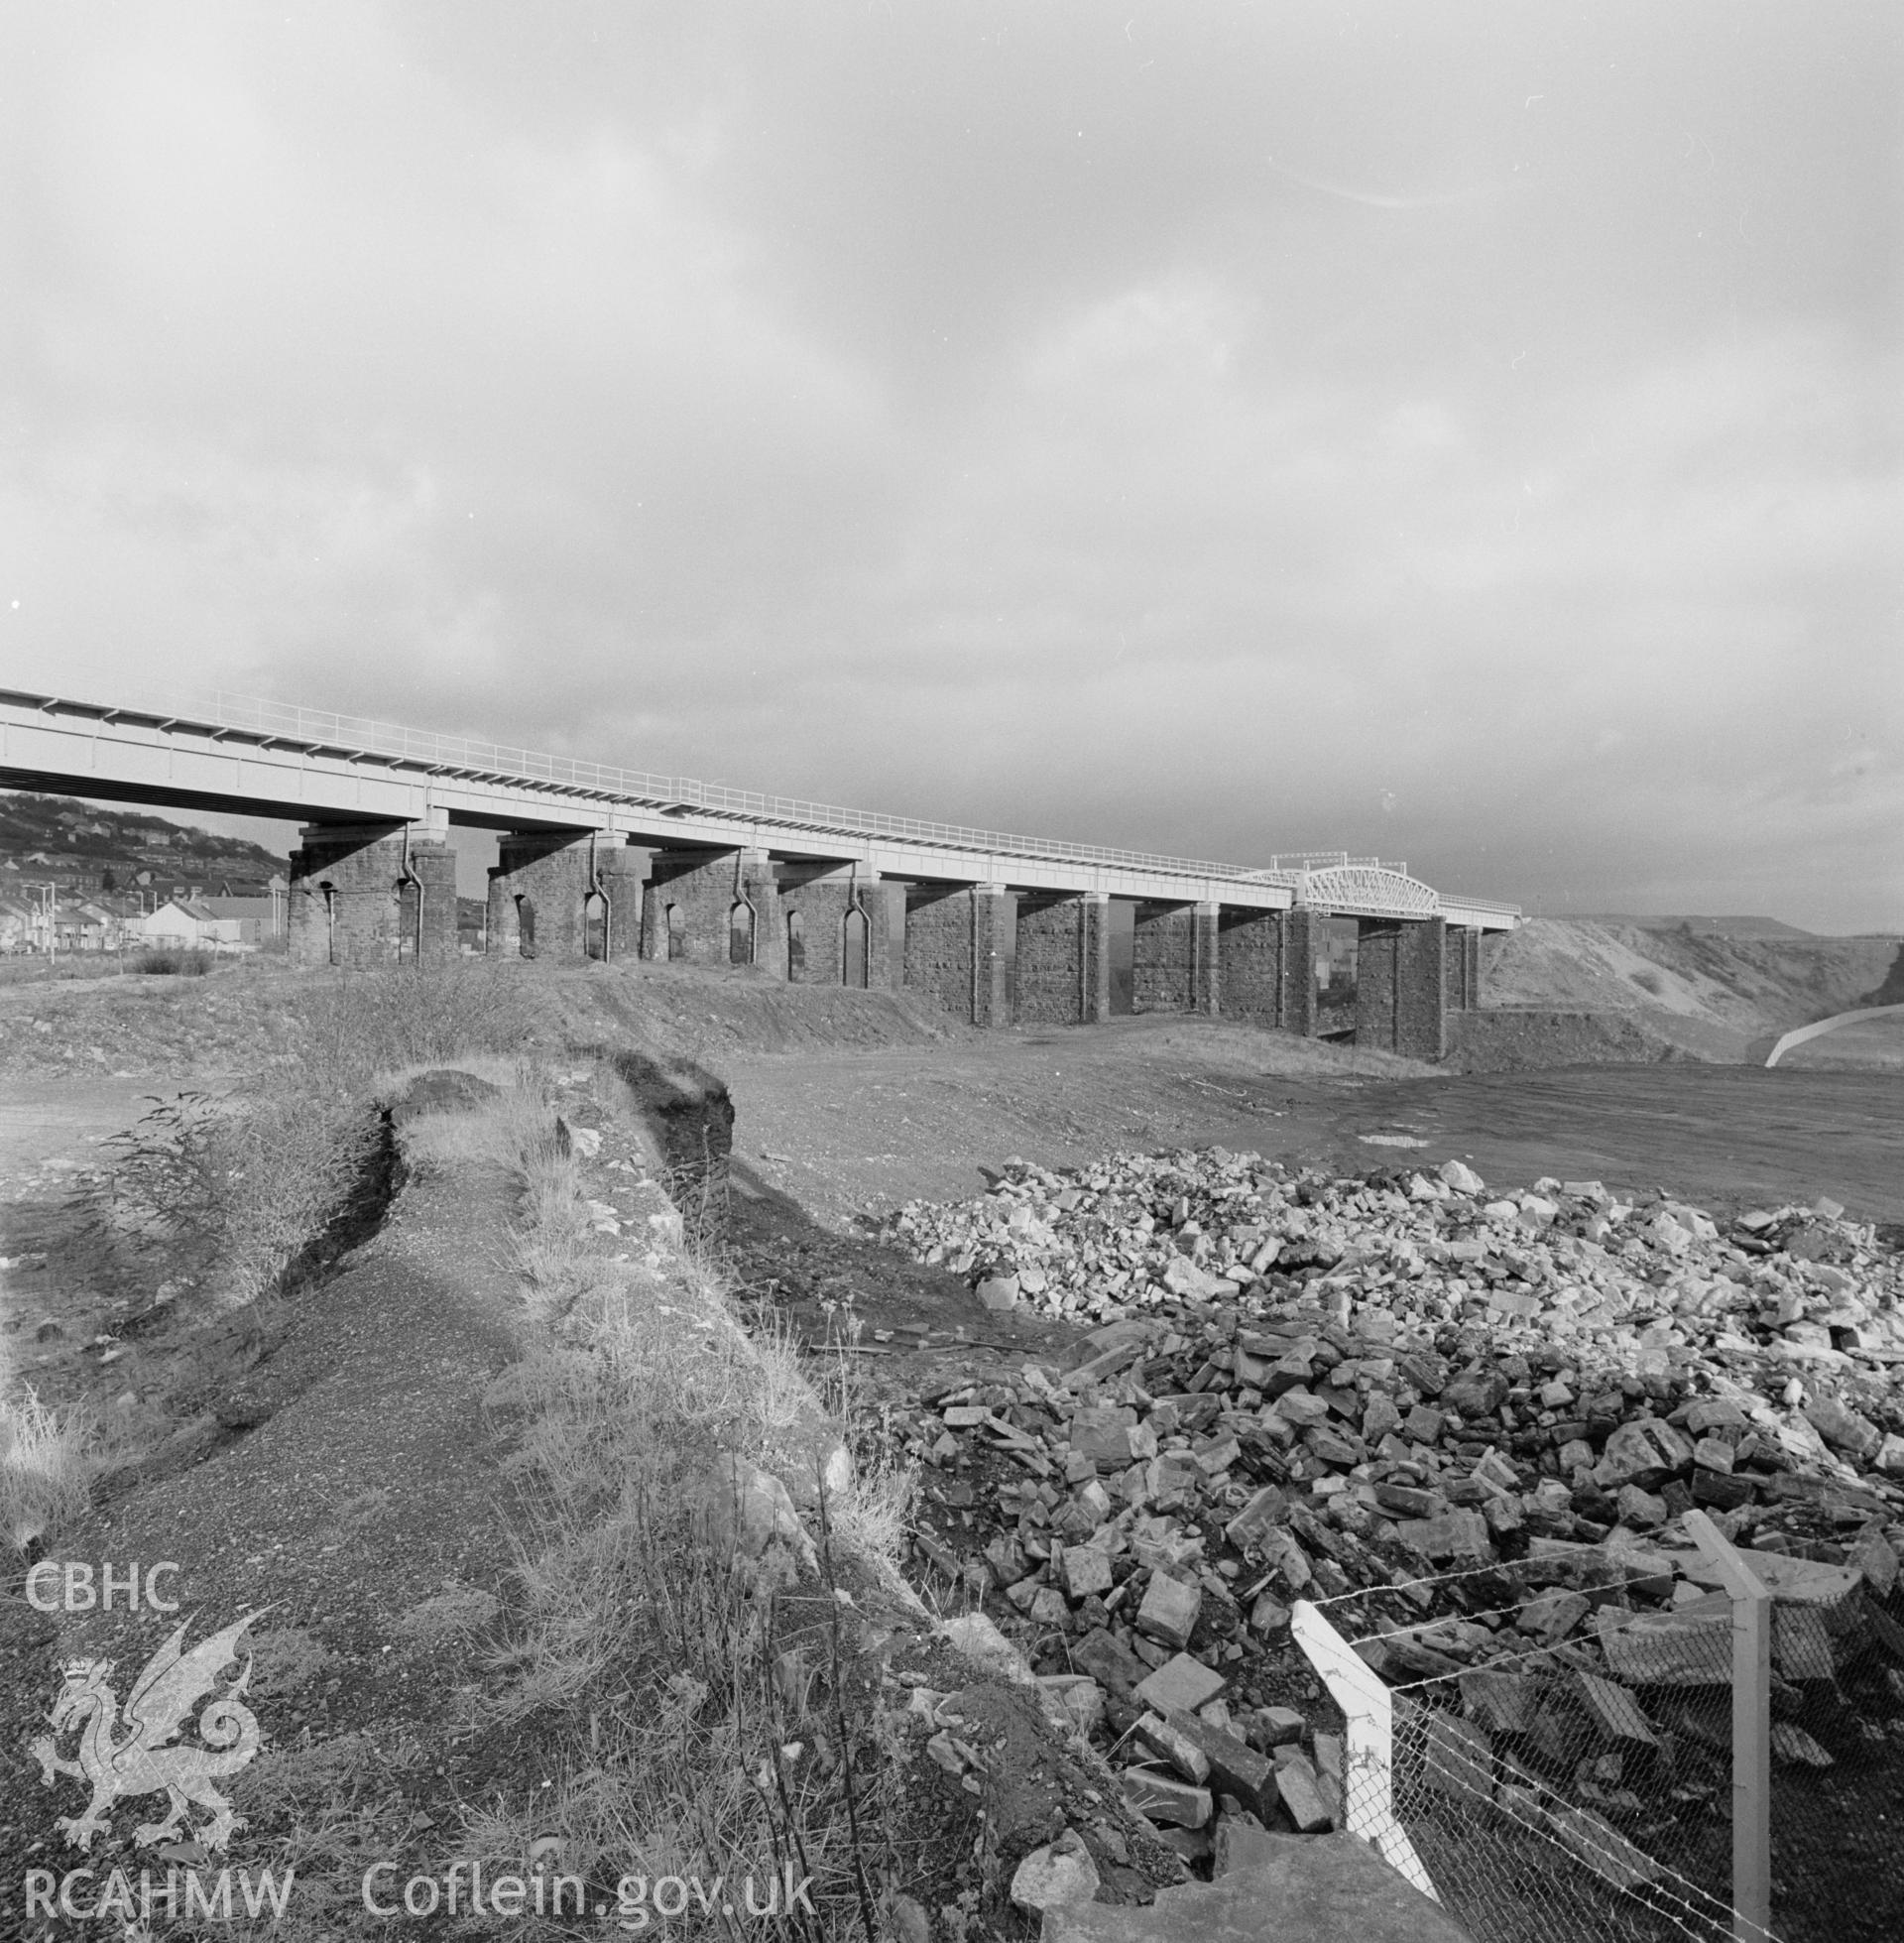 Digital copy of a black and white negative showing view of Landore Viaduct, taken in 1981.